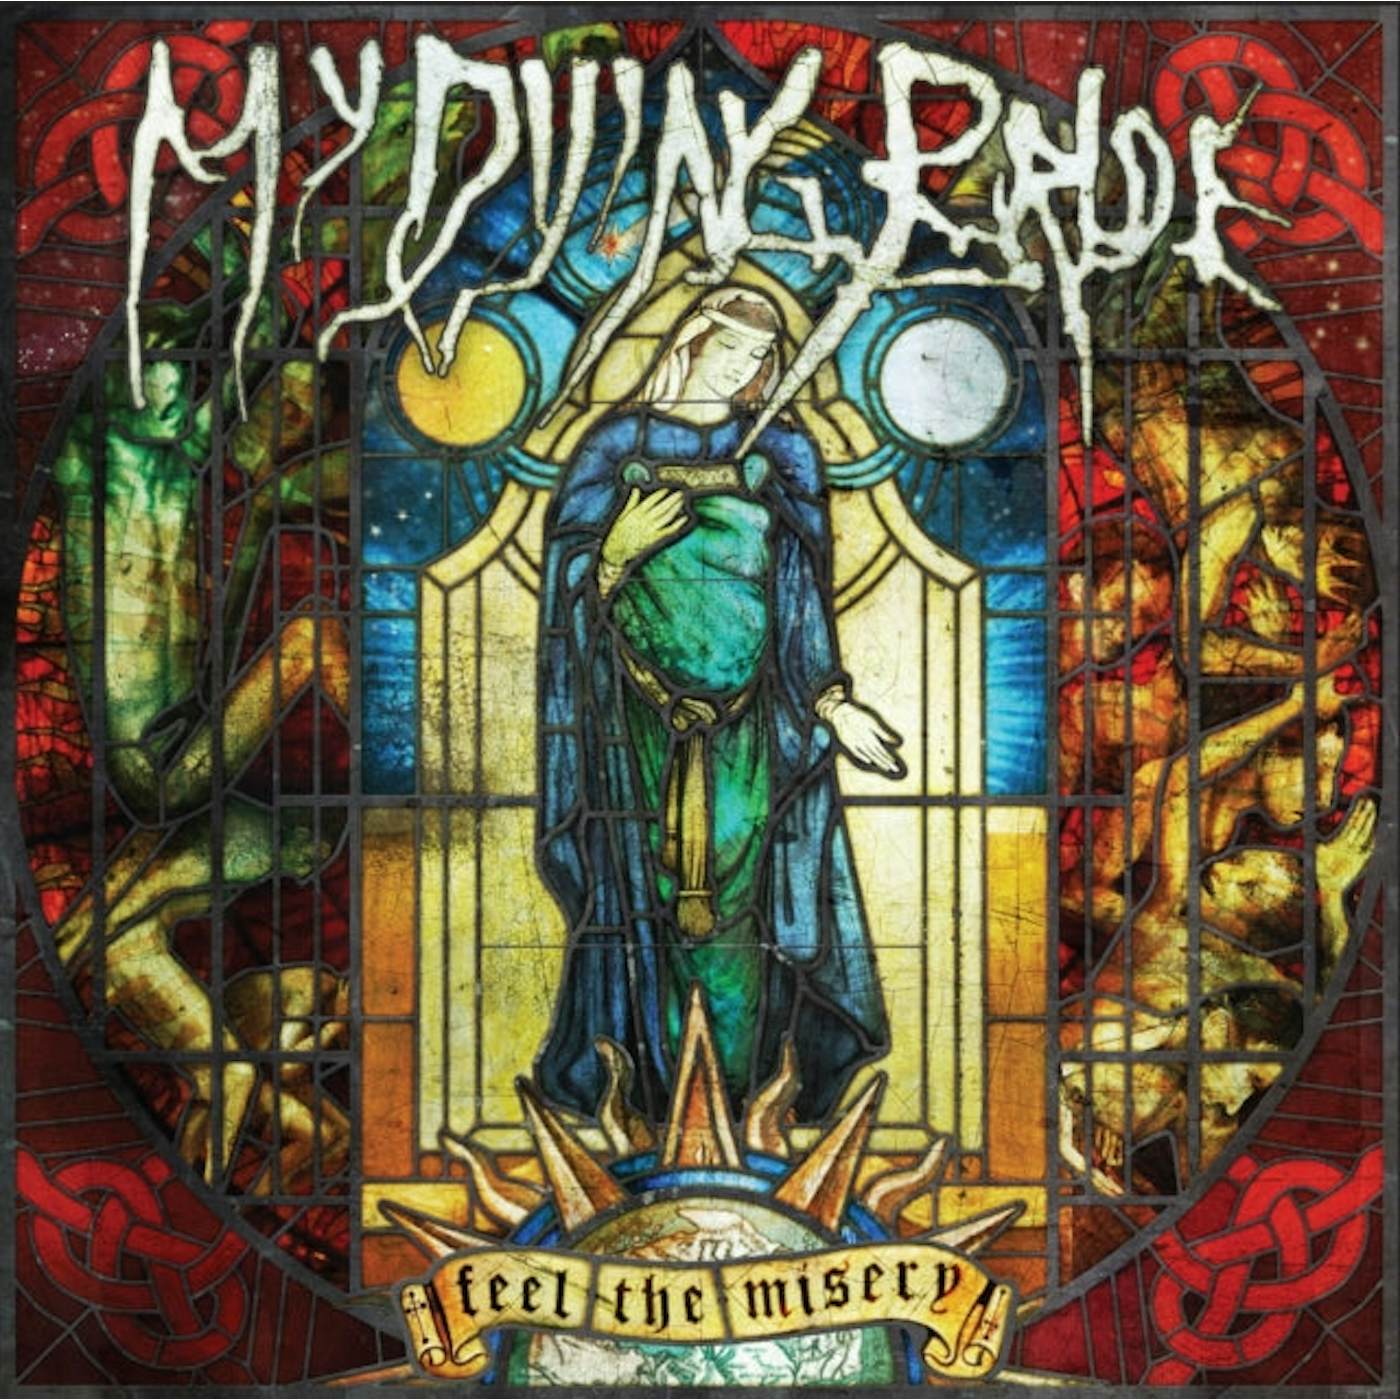 My Dying Bride CD - Feel The Misery